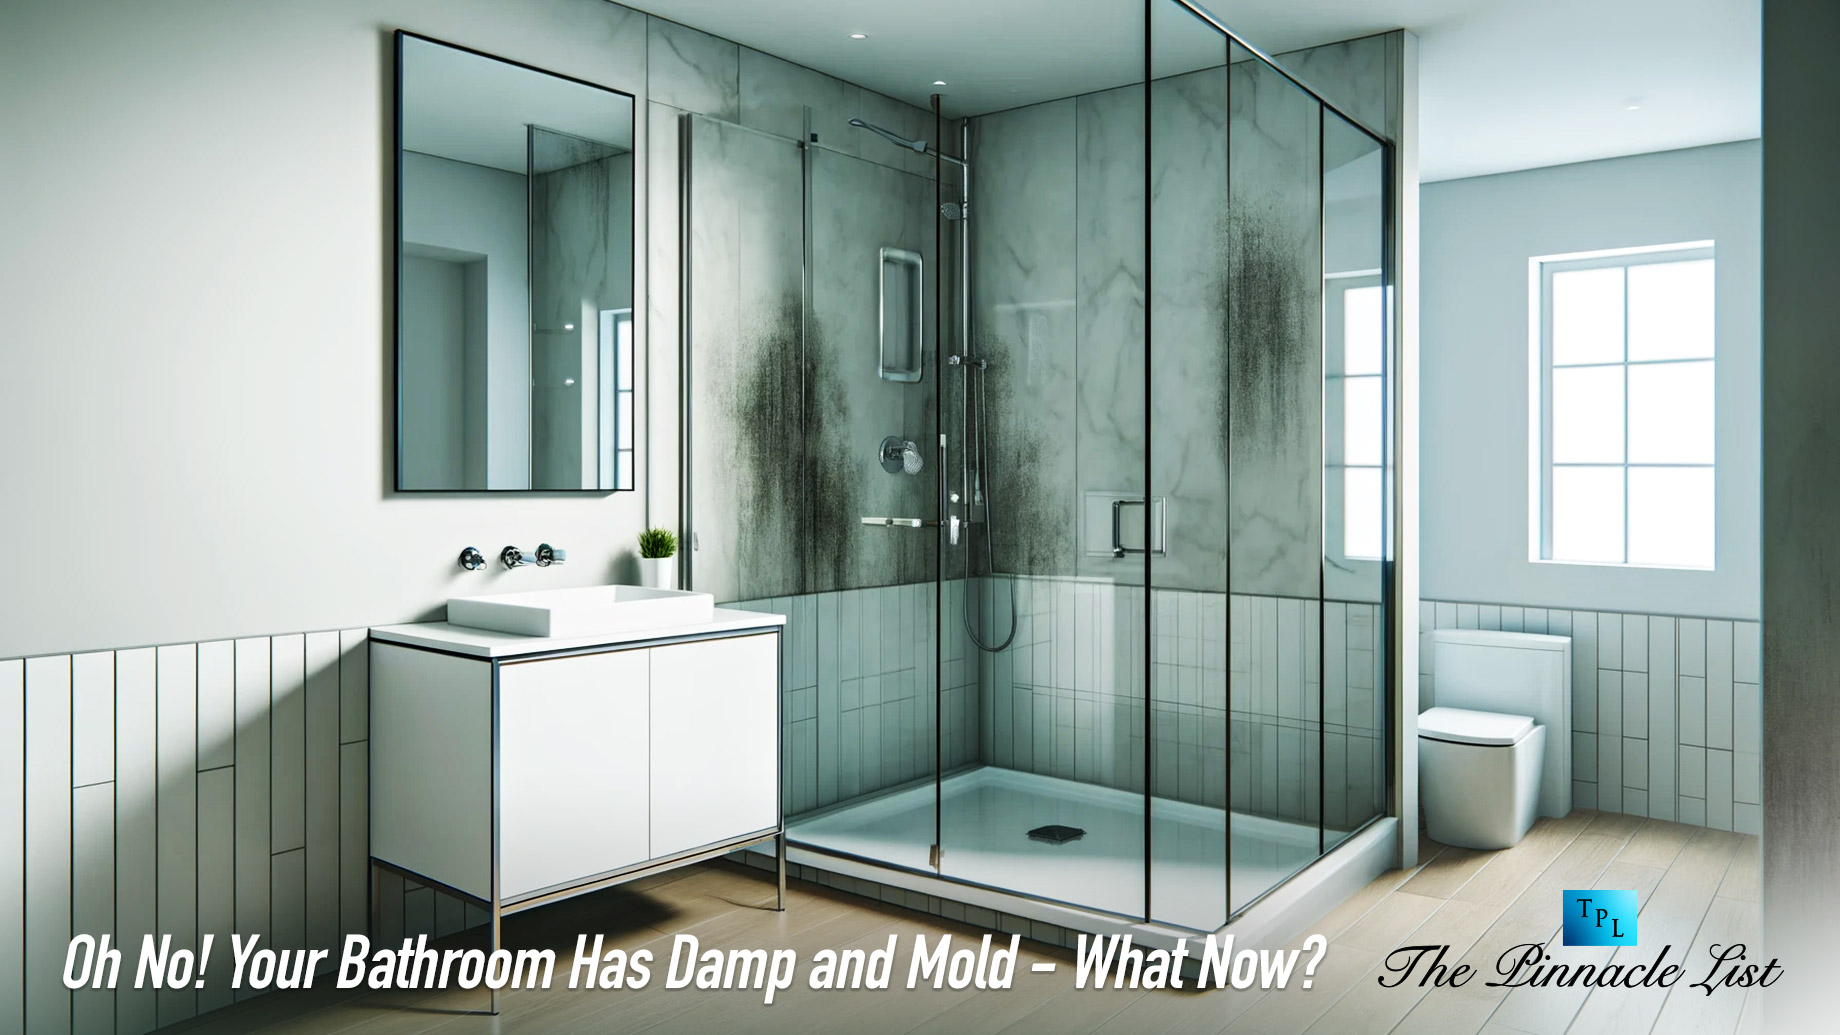 Oh No! Your Bathroom Has Damp and Mold - What Now?